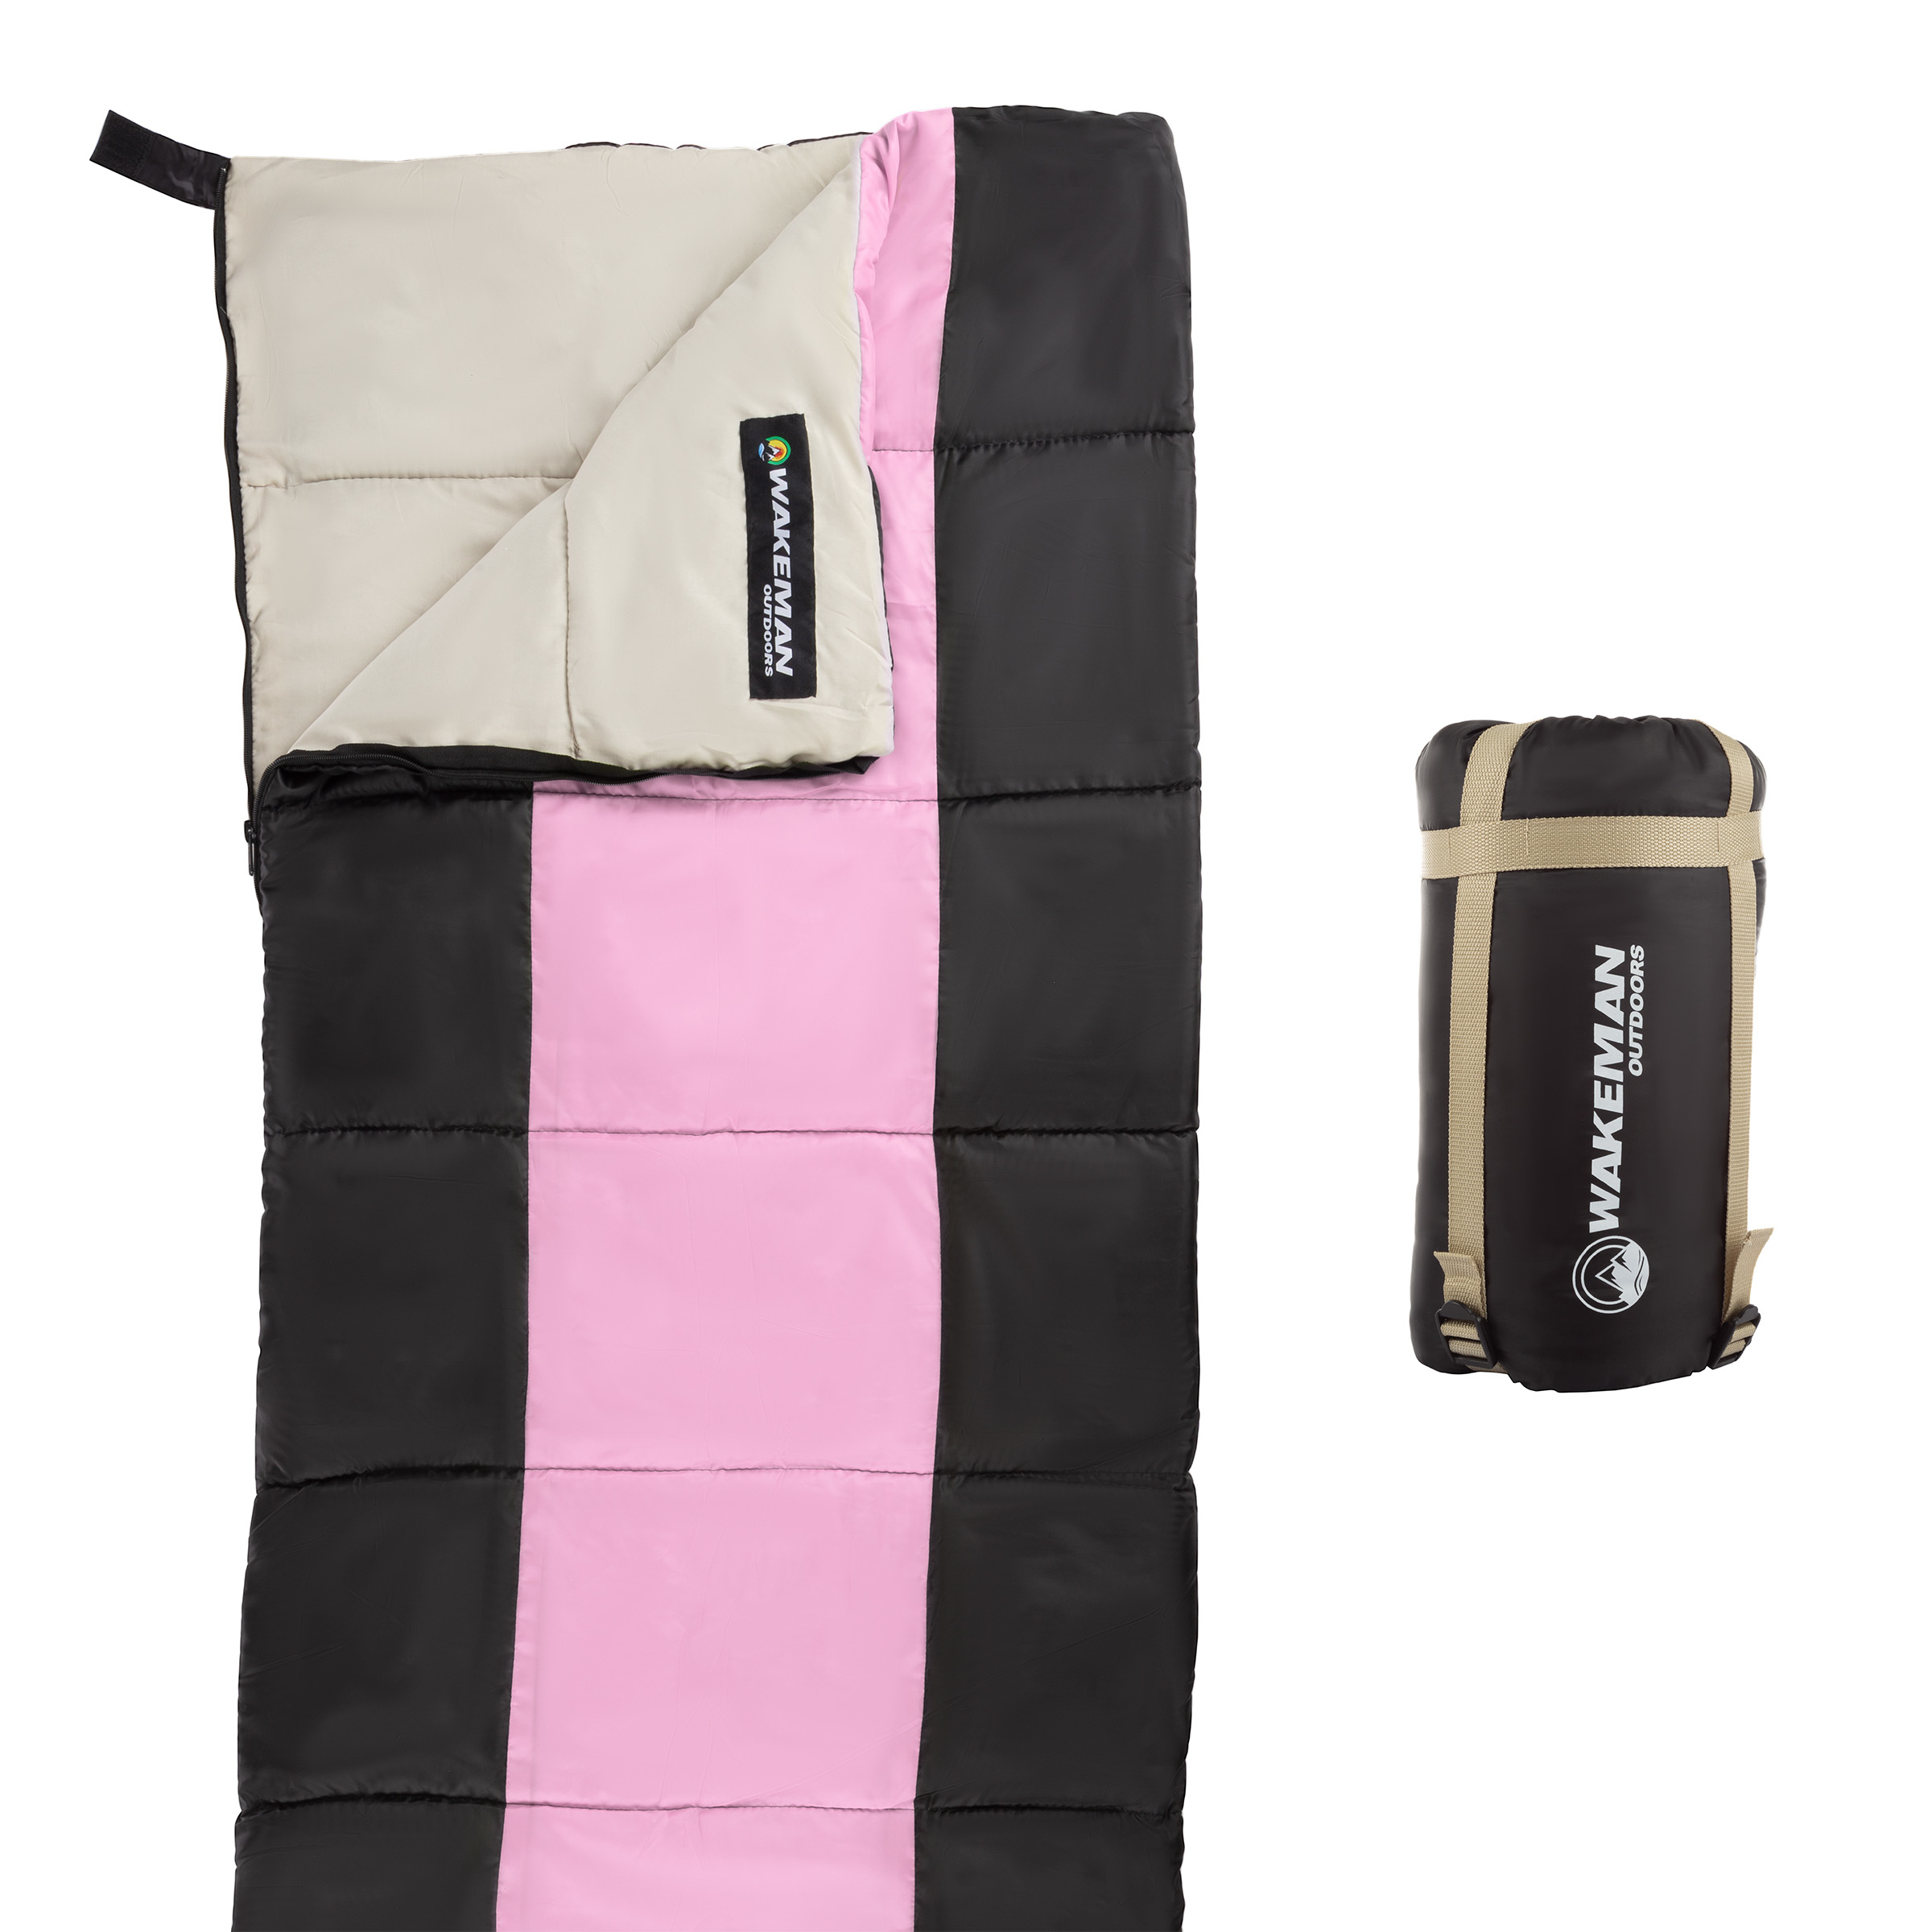 Kids Lightweight Sleeping Bag Camping Hiking Sleepovers Bonfires Easy Carry 66 Inches - Pink And Black